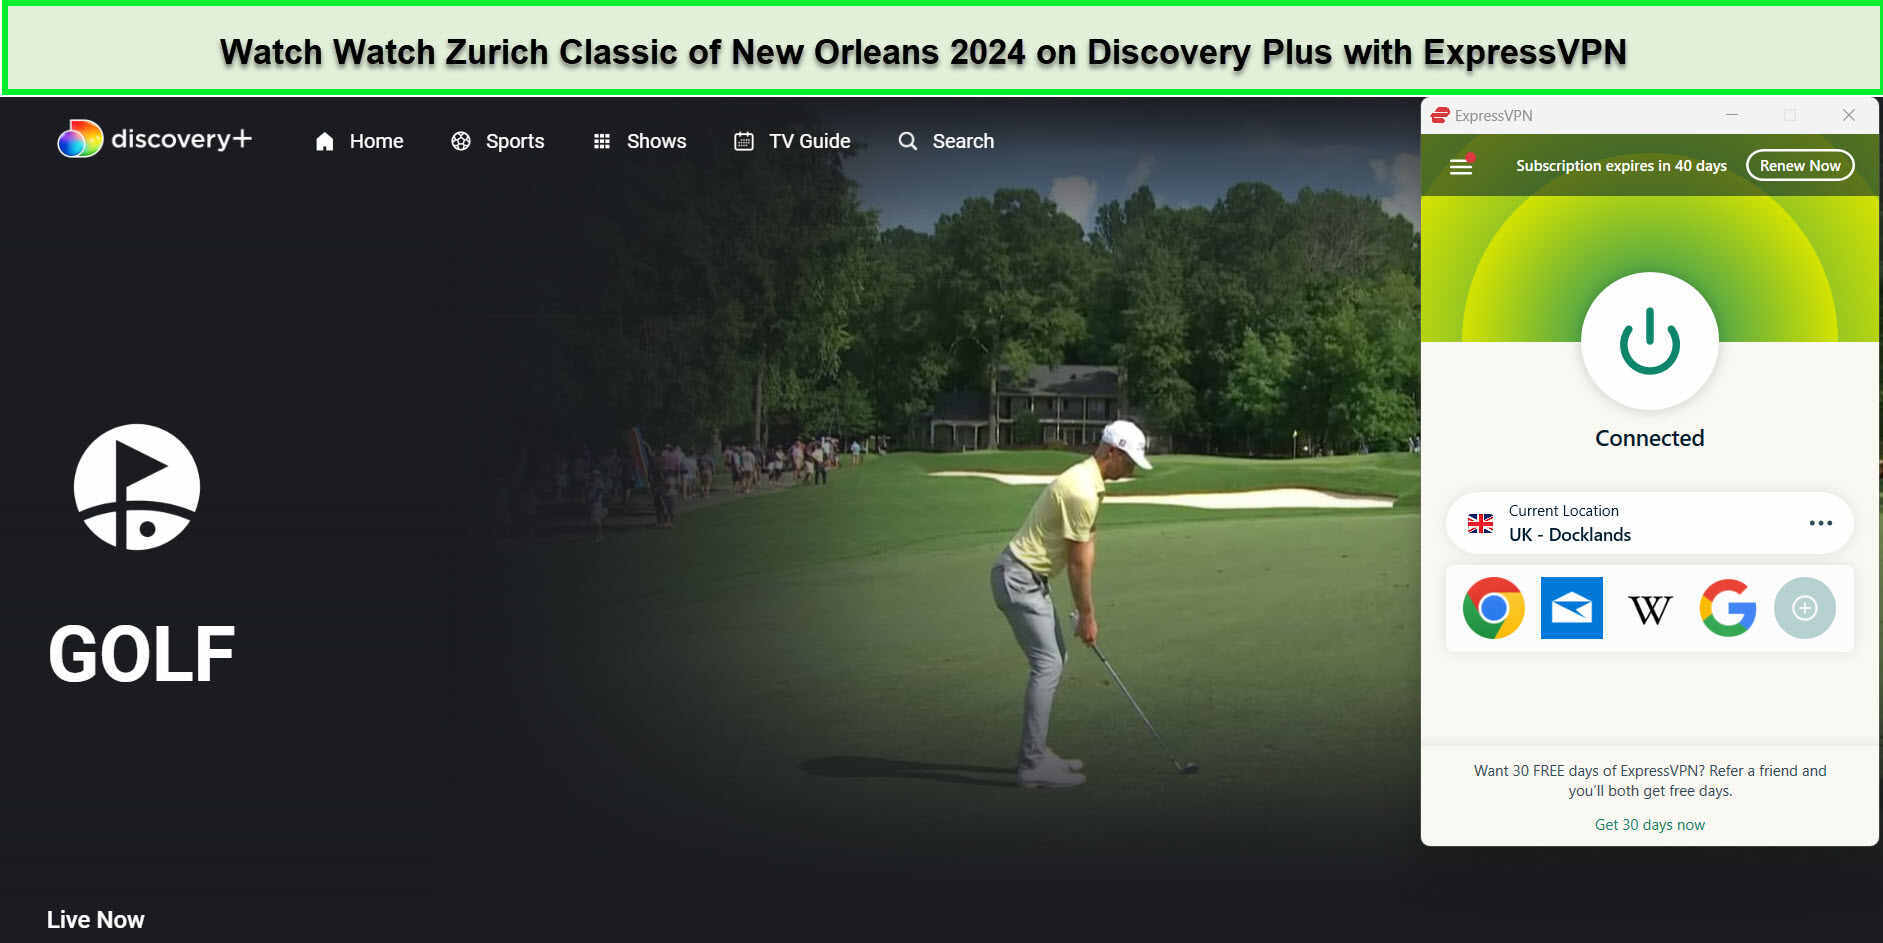 Watch-Zurich-Classic-of-New-Orleans-2024-in-UAE-On-Discovery-Plus-with-ExpressVPN